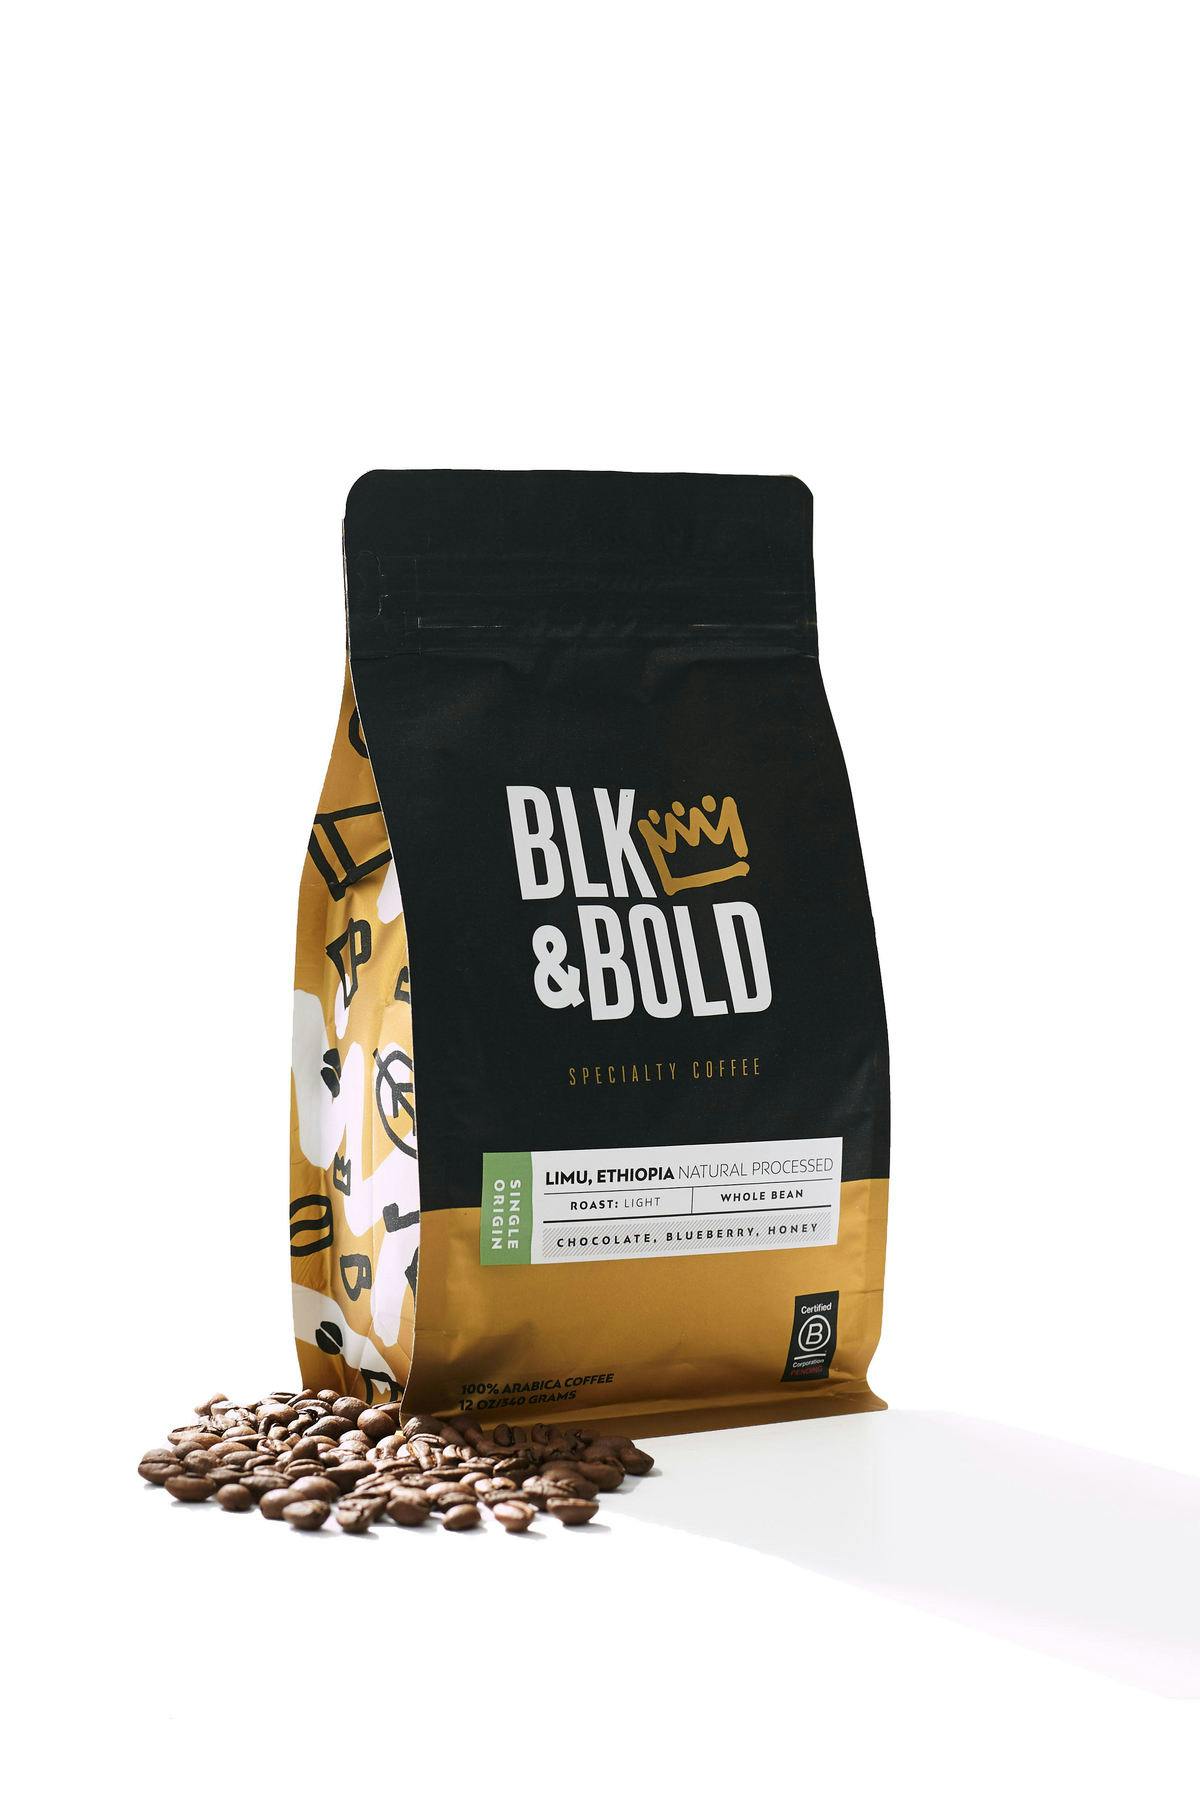 Blk & Bold Coffee at Target